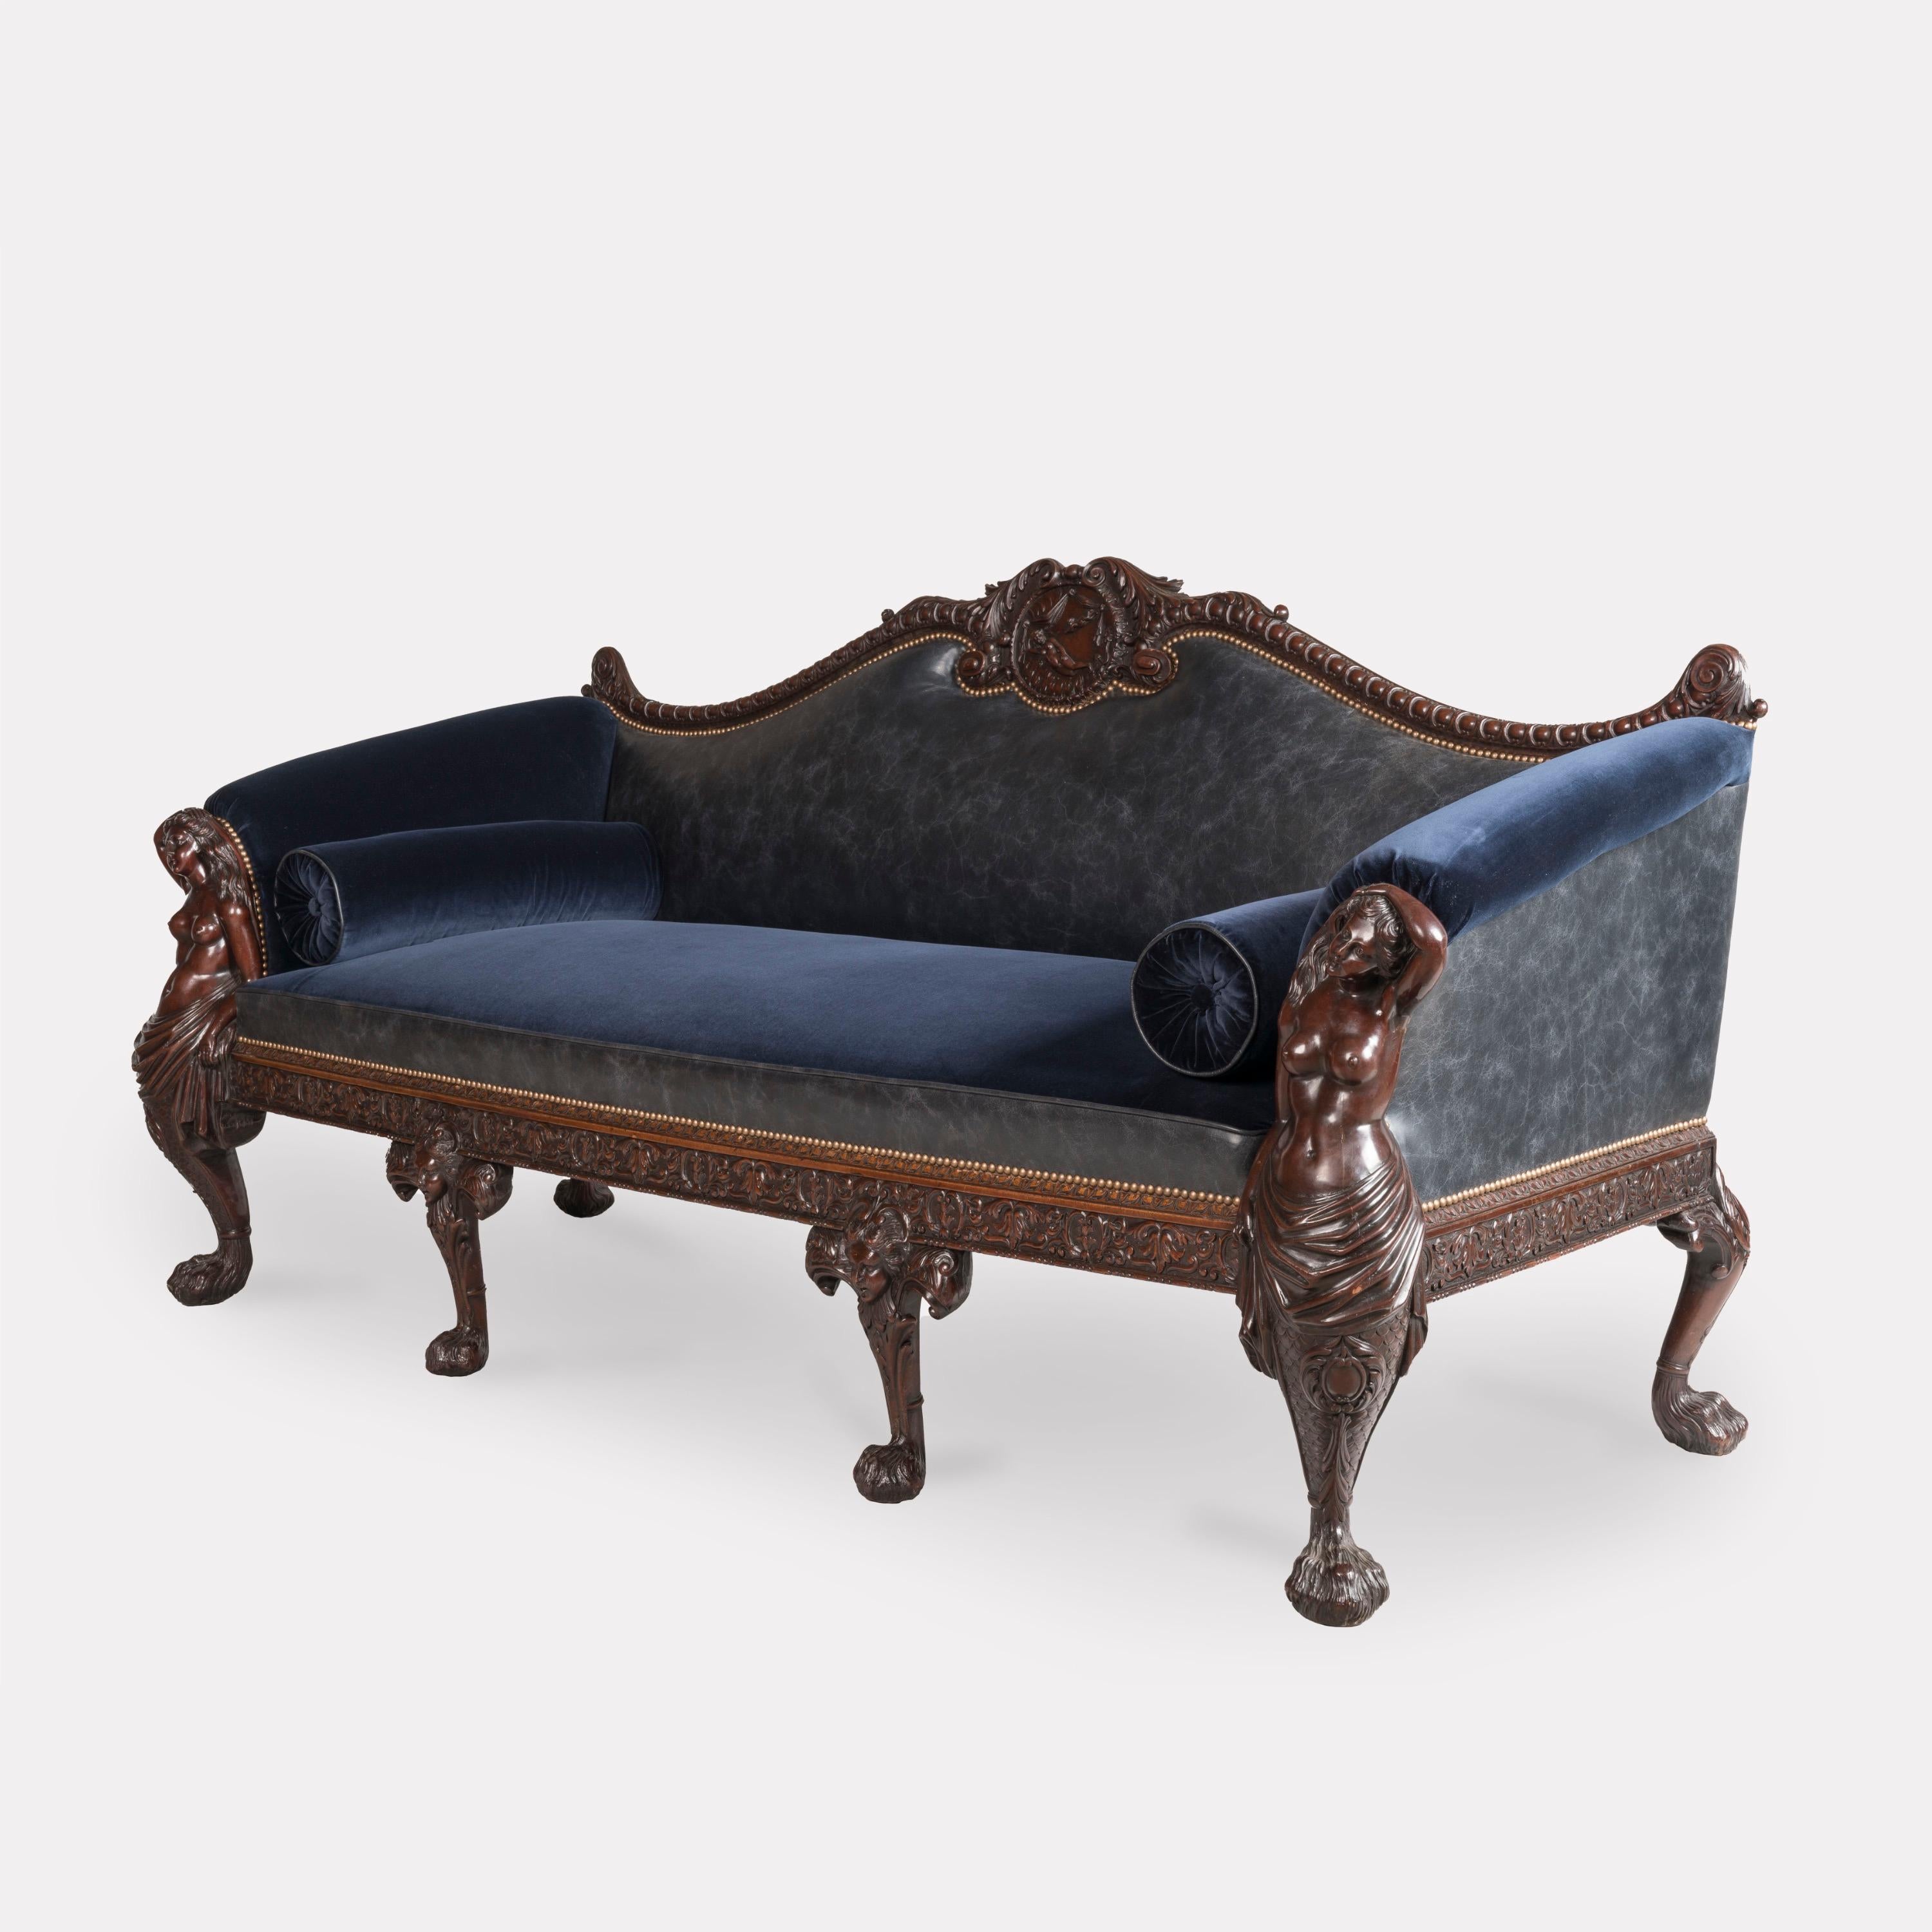 English Large Late 19th Century Hand-Carved Mahogany Sofa with Leather and Velvet Fabric For Sale